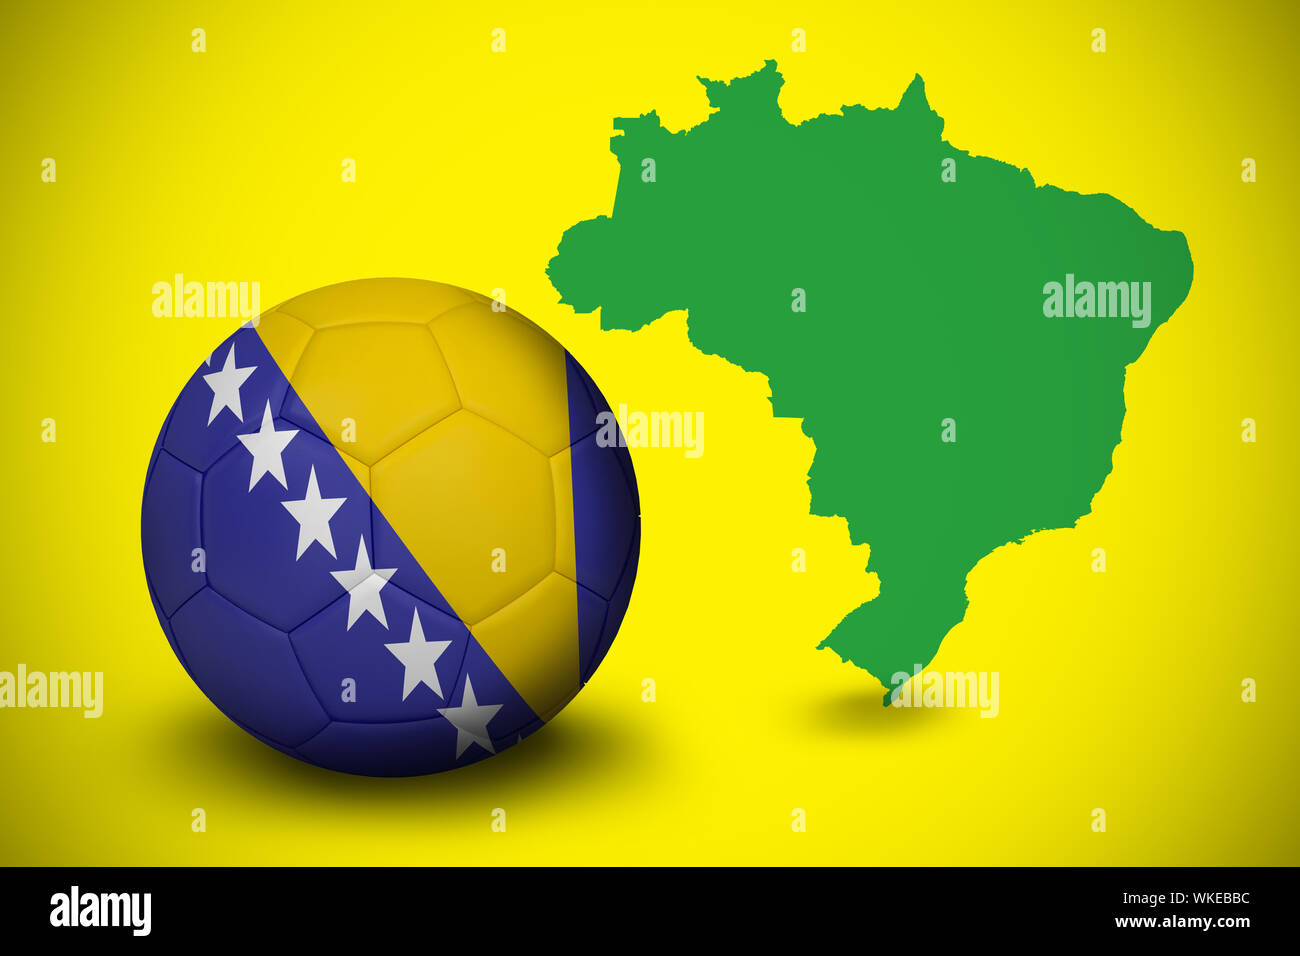 Football in bosnia and herzegovina colours  against green brazil outline on yellow Stock Photo